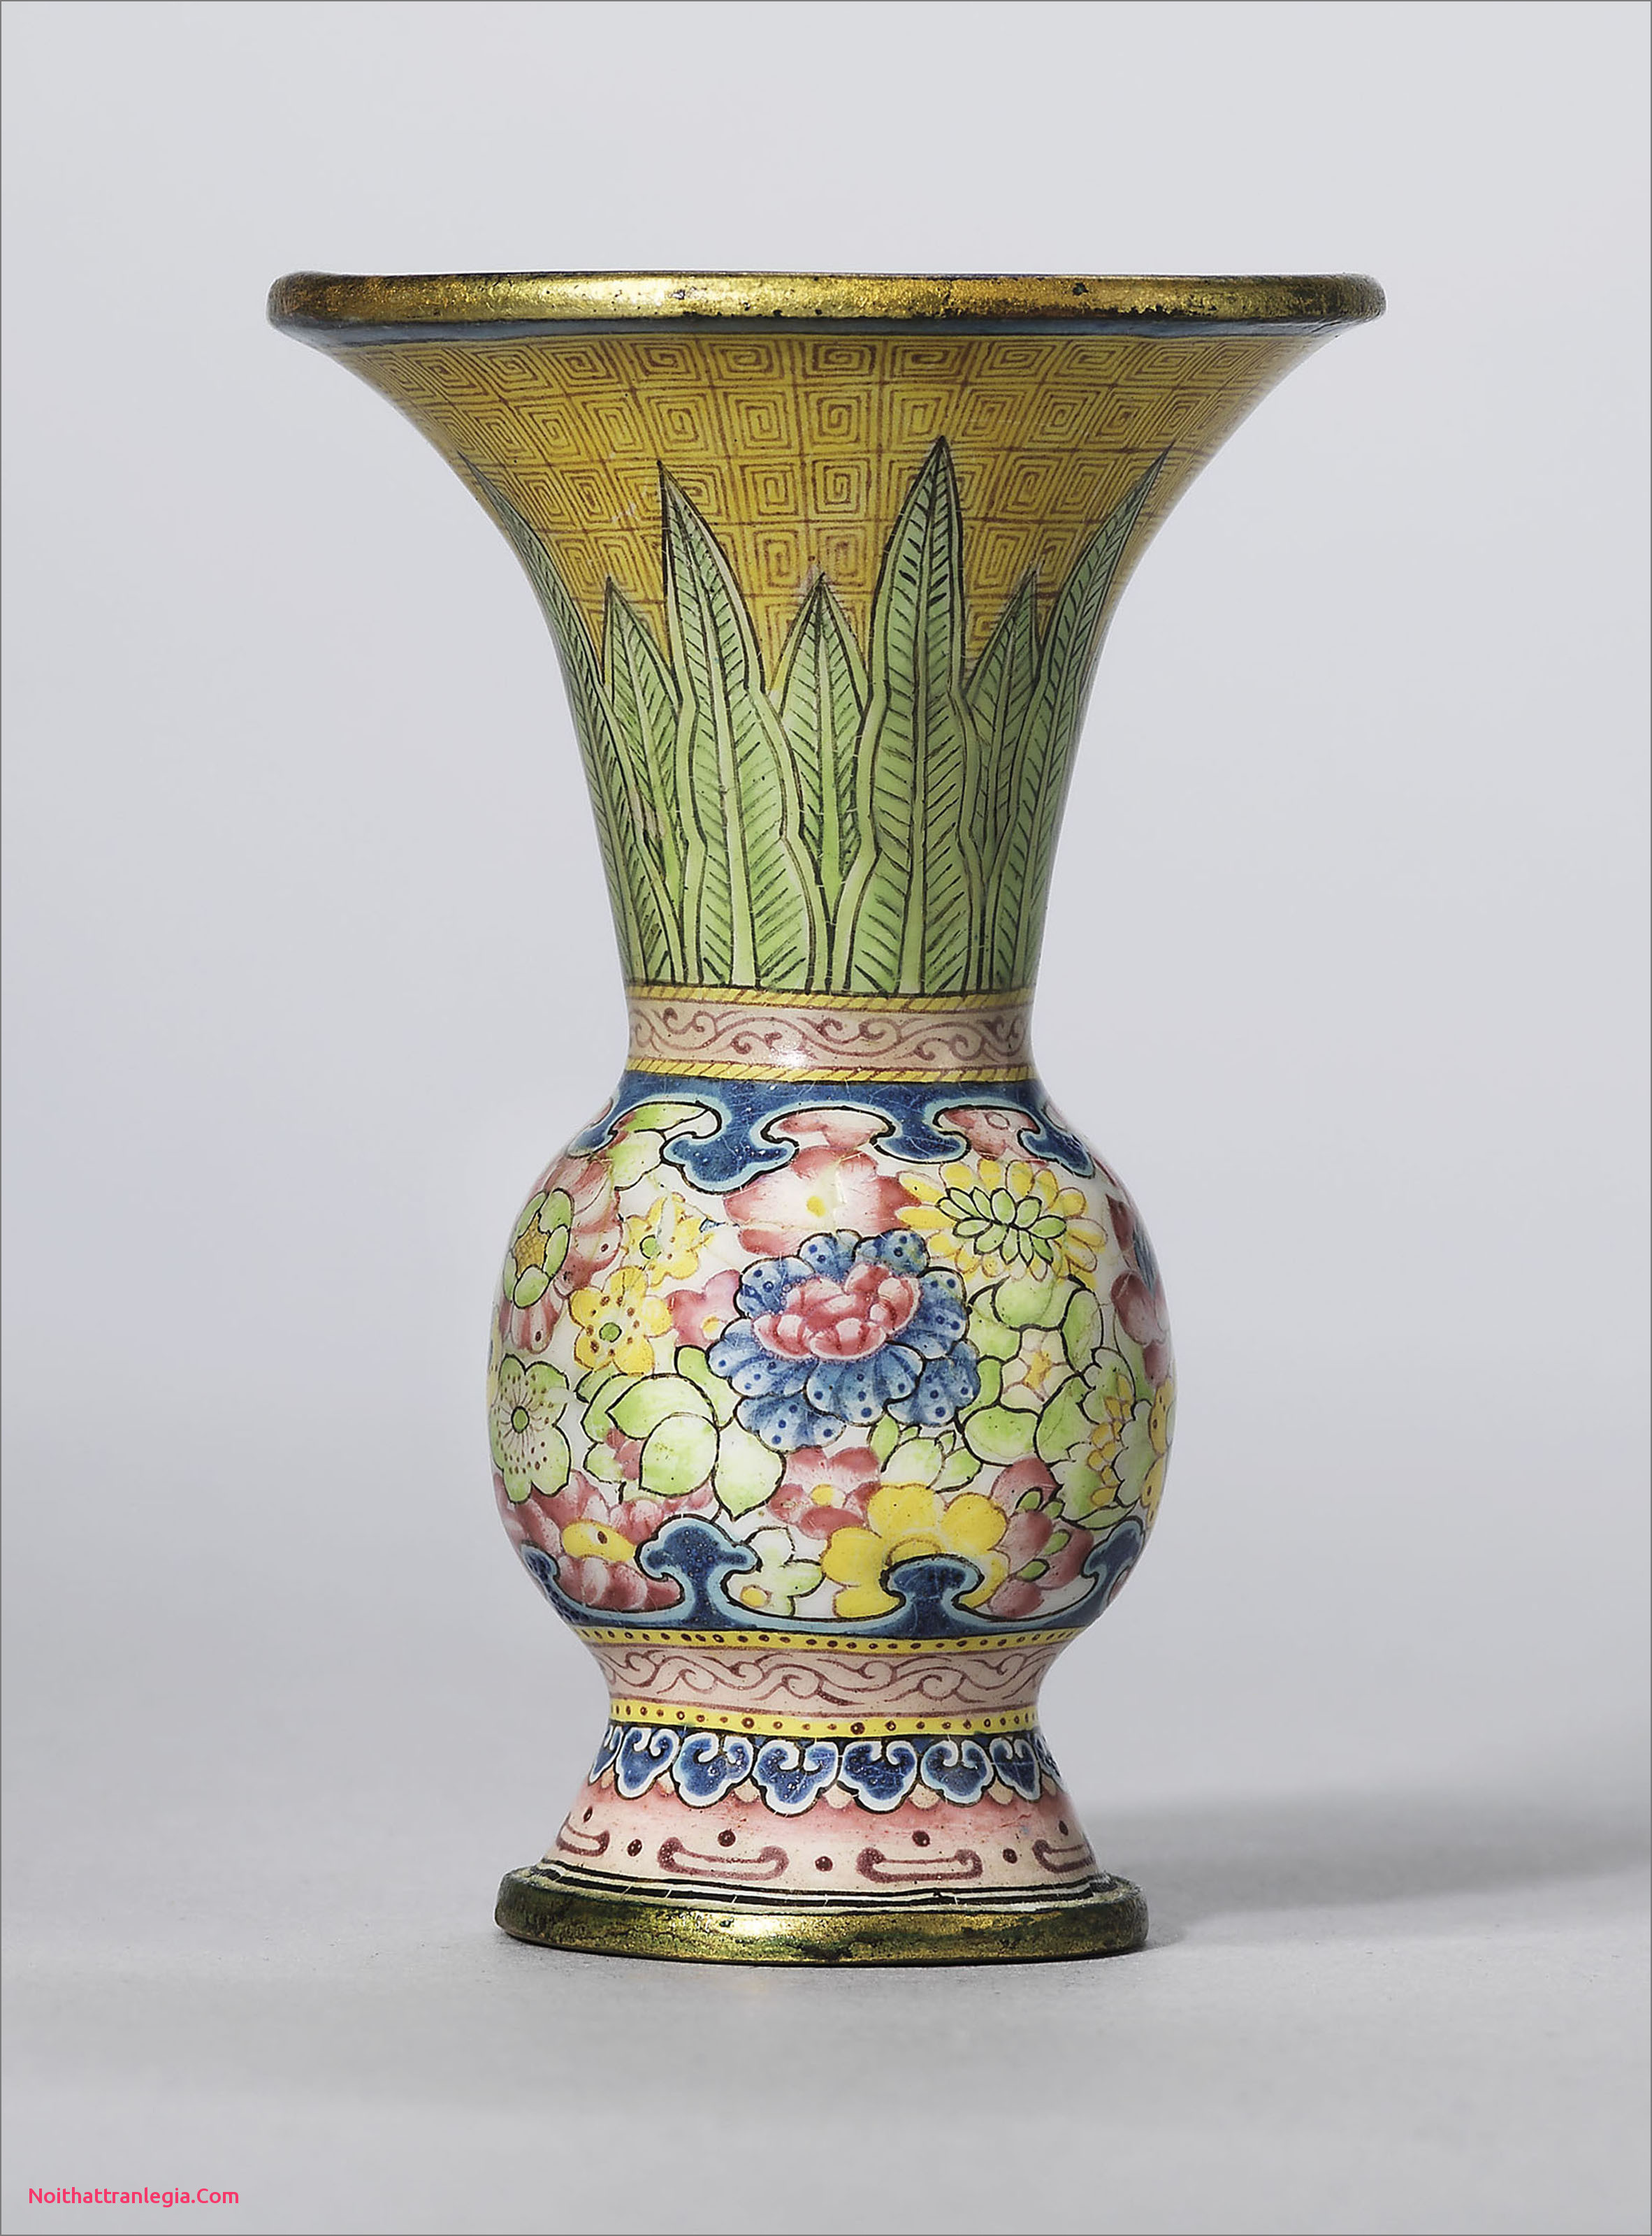 16 Stylish Antique Hand Painted Floral Vases 2024 free download antique hand painted floral vases of 20 chinese antique vase noithattranlegia vases design intended for a rare painted enamel gu shaped miniature vase qianlong four character mark in